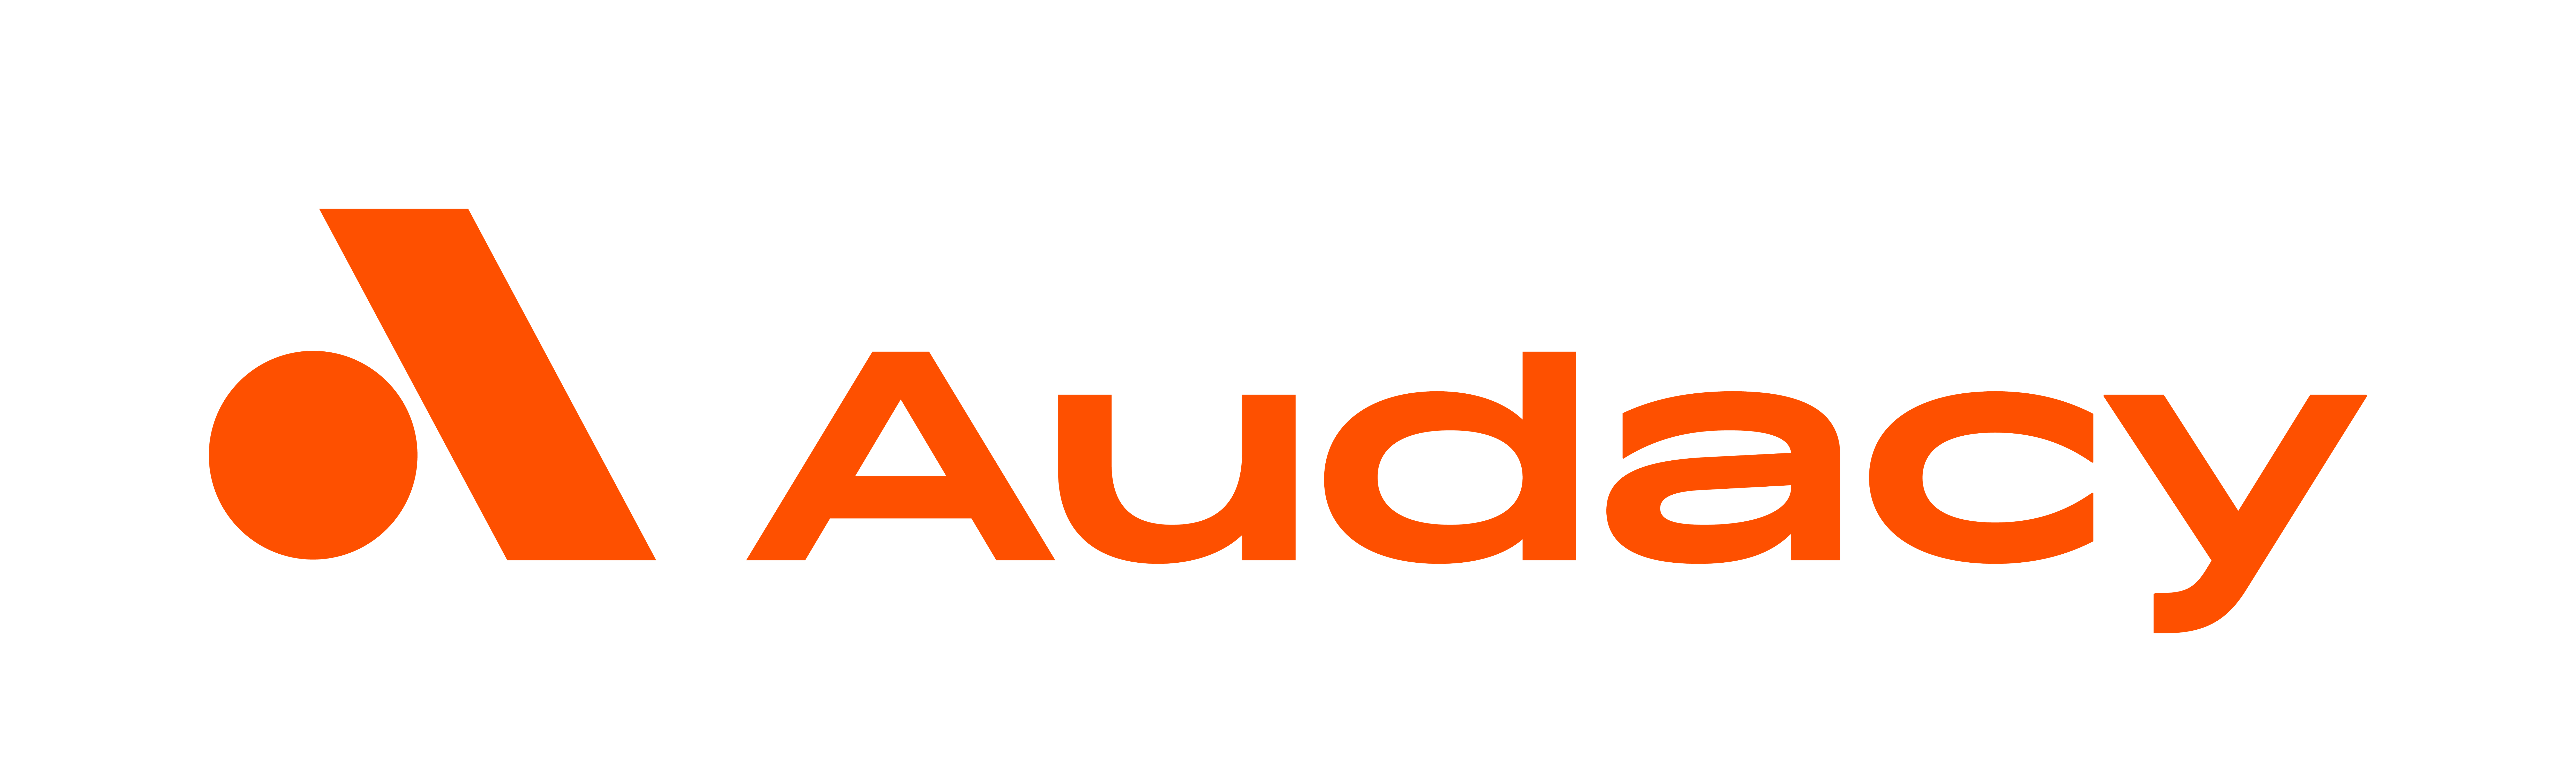 Audacy - New Orleans